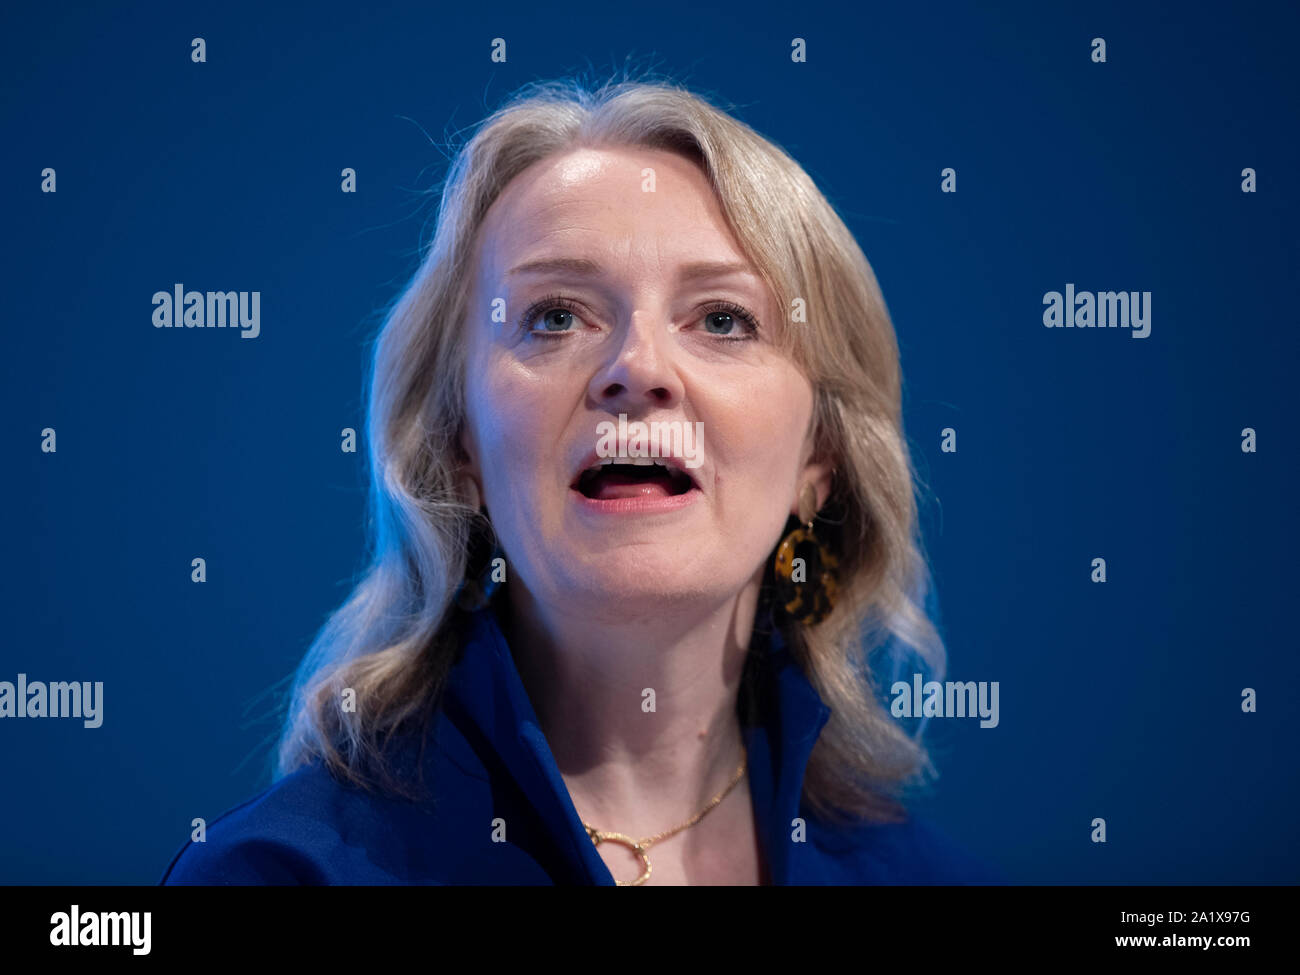 manchester uk 29th september 2019 liz truss secretary of state for international trade and president of the board of trade minister for women and equalities and mp for south west norfolk speaks at day one of the conservative party conference in manchester russell hartalamy live news 2A1X97G